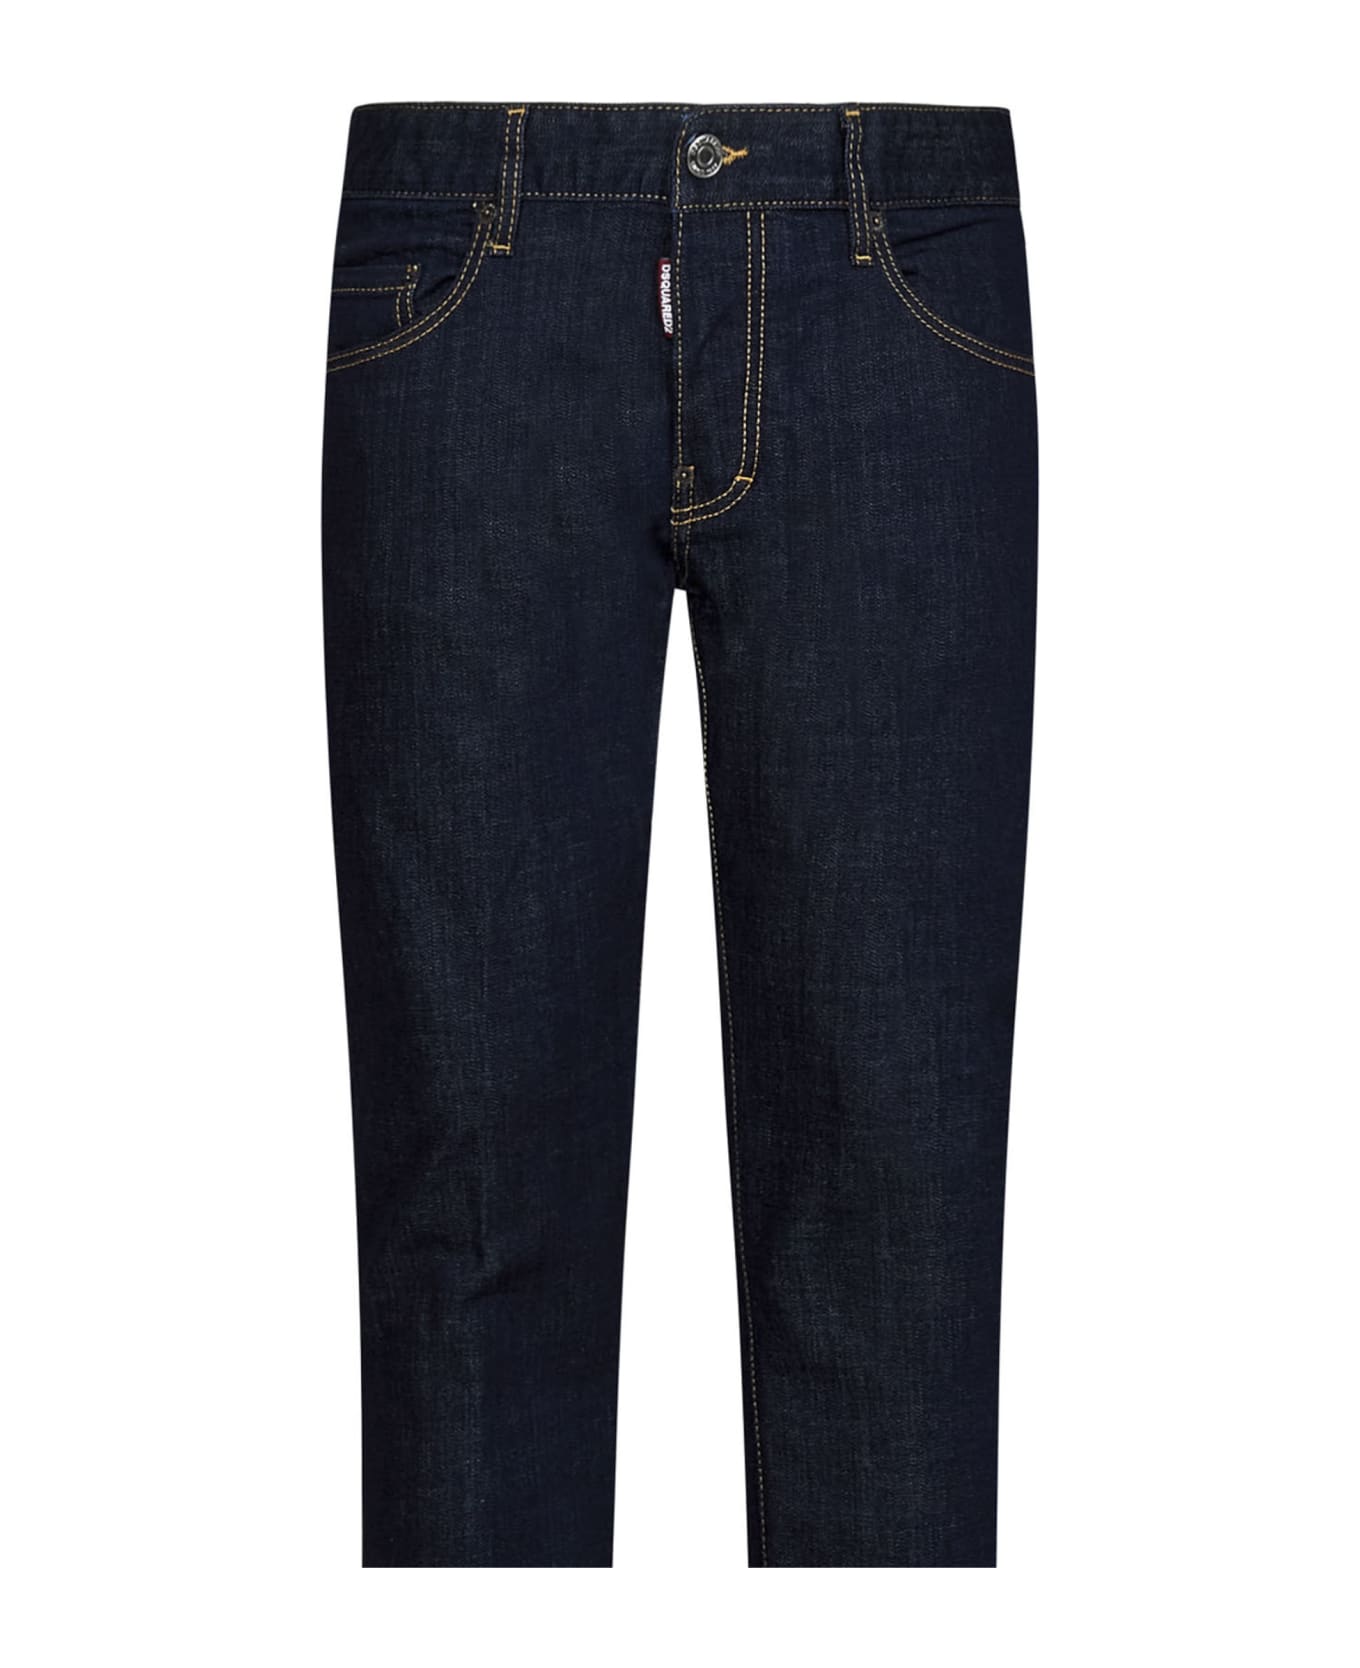 Dsquared2 Jeans - Blu navy